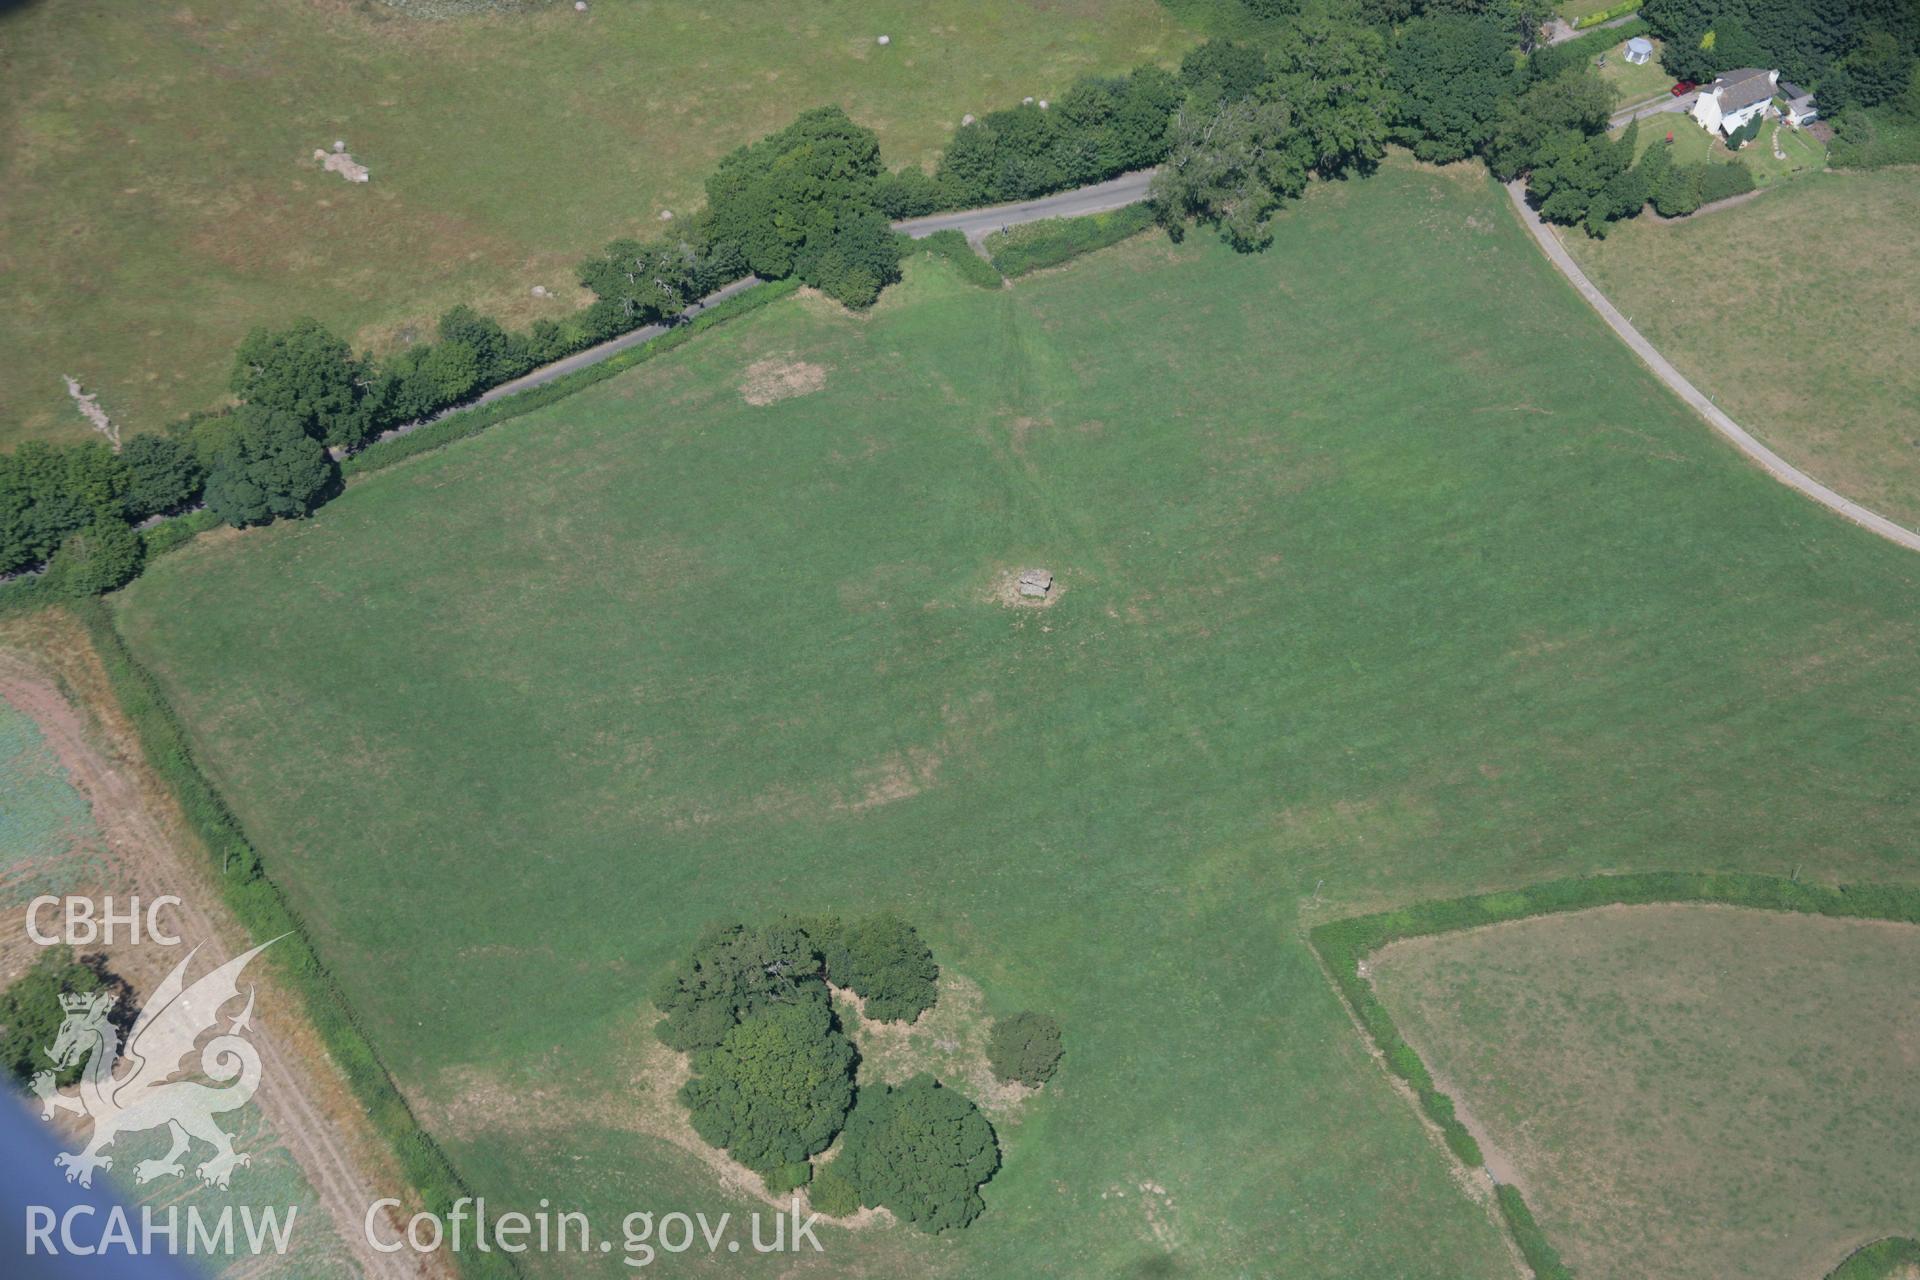 RCAHMW colour oblique aerial photograph of St Lythans Chambered Long Cairn, Maesyfelin. Taken on 24 July 2006 by Toby Driver.